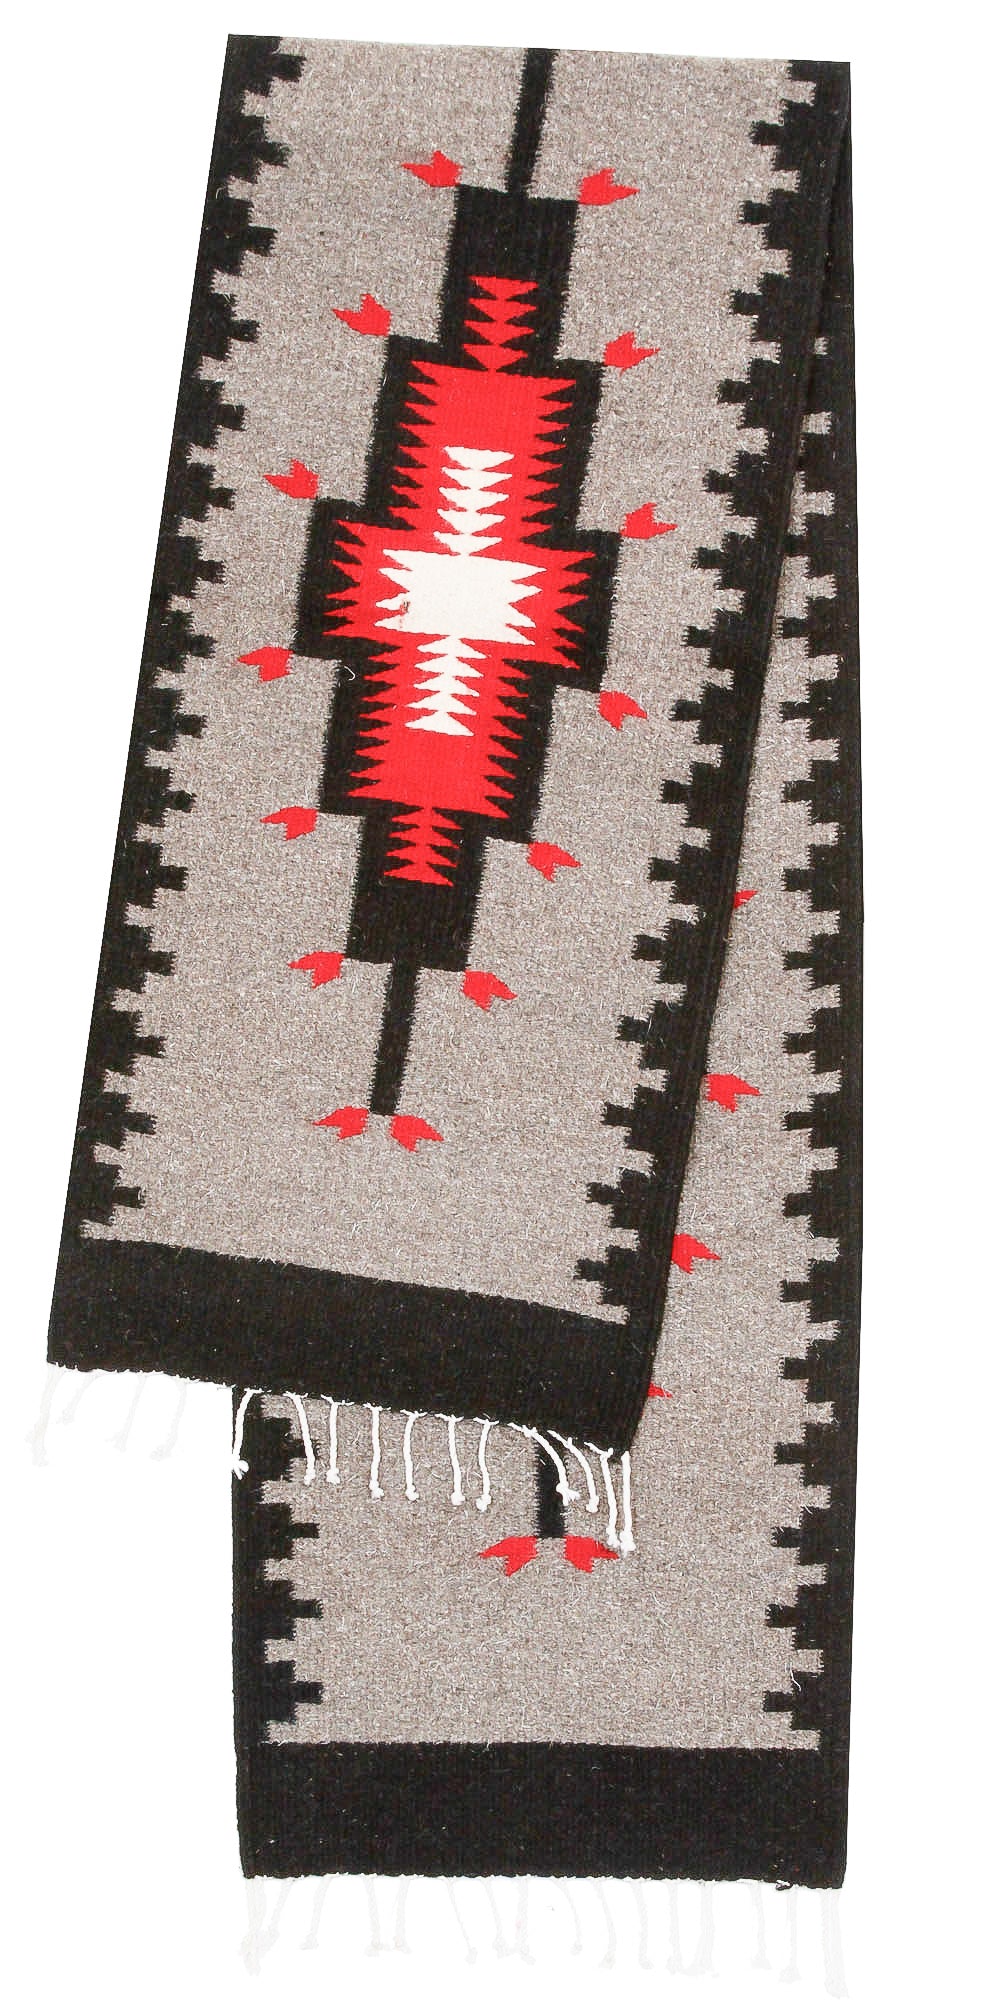 Handwoven Zapotec Indian Table Runner - Kaibito Grey Wool Oaxacan Textile